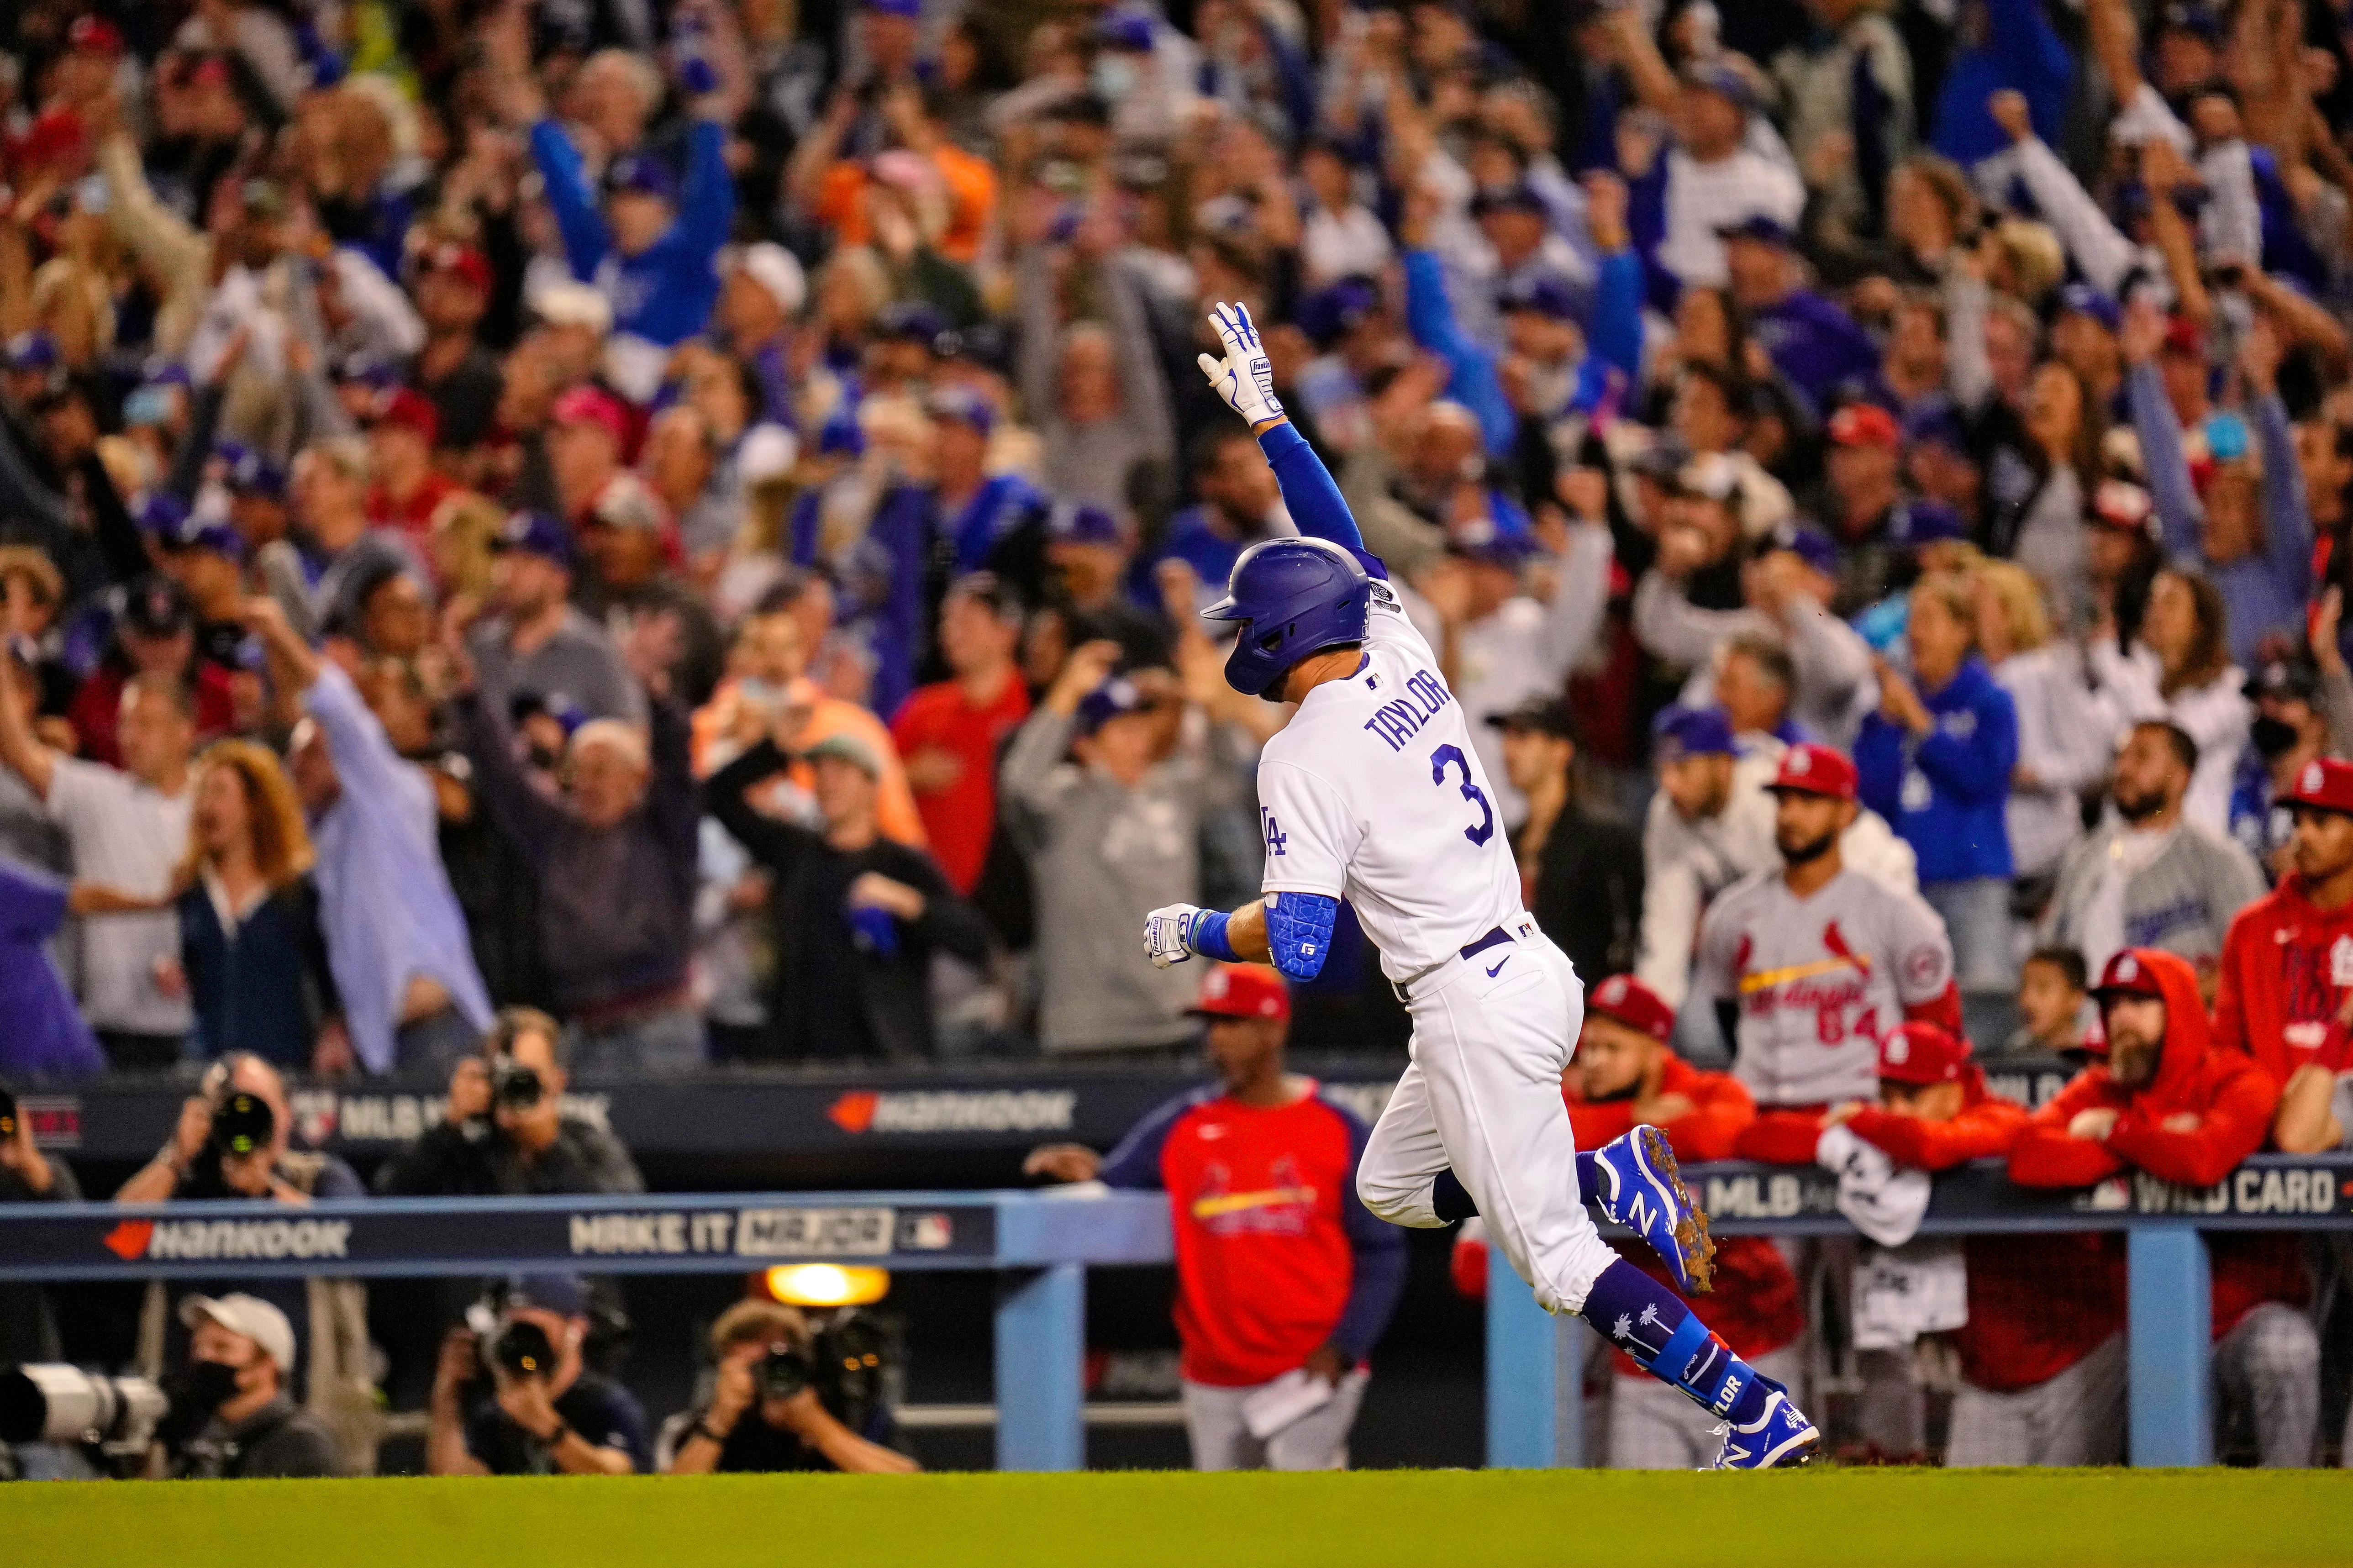 Chris Taylor's walk-off home run sends Dodgers past Cardinals in